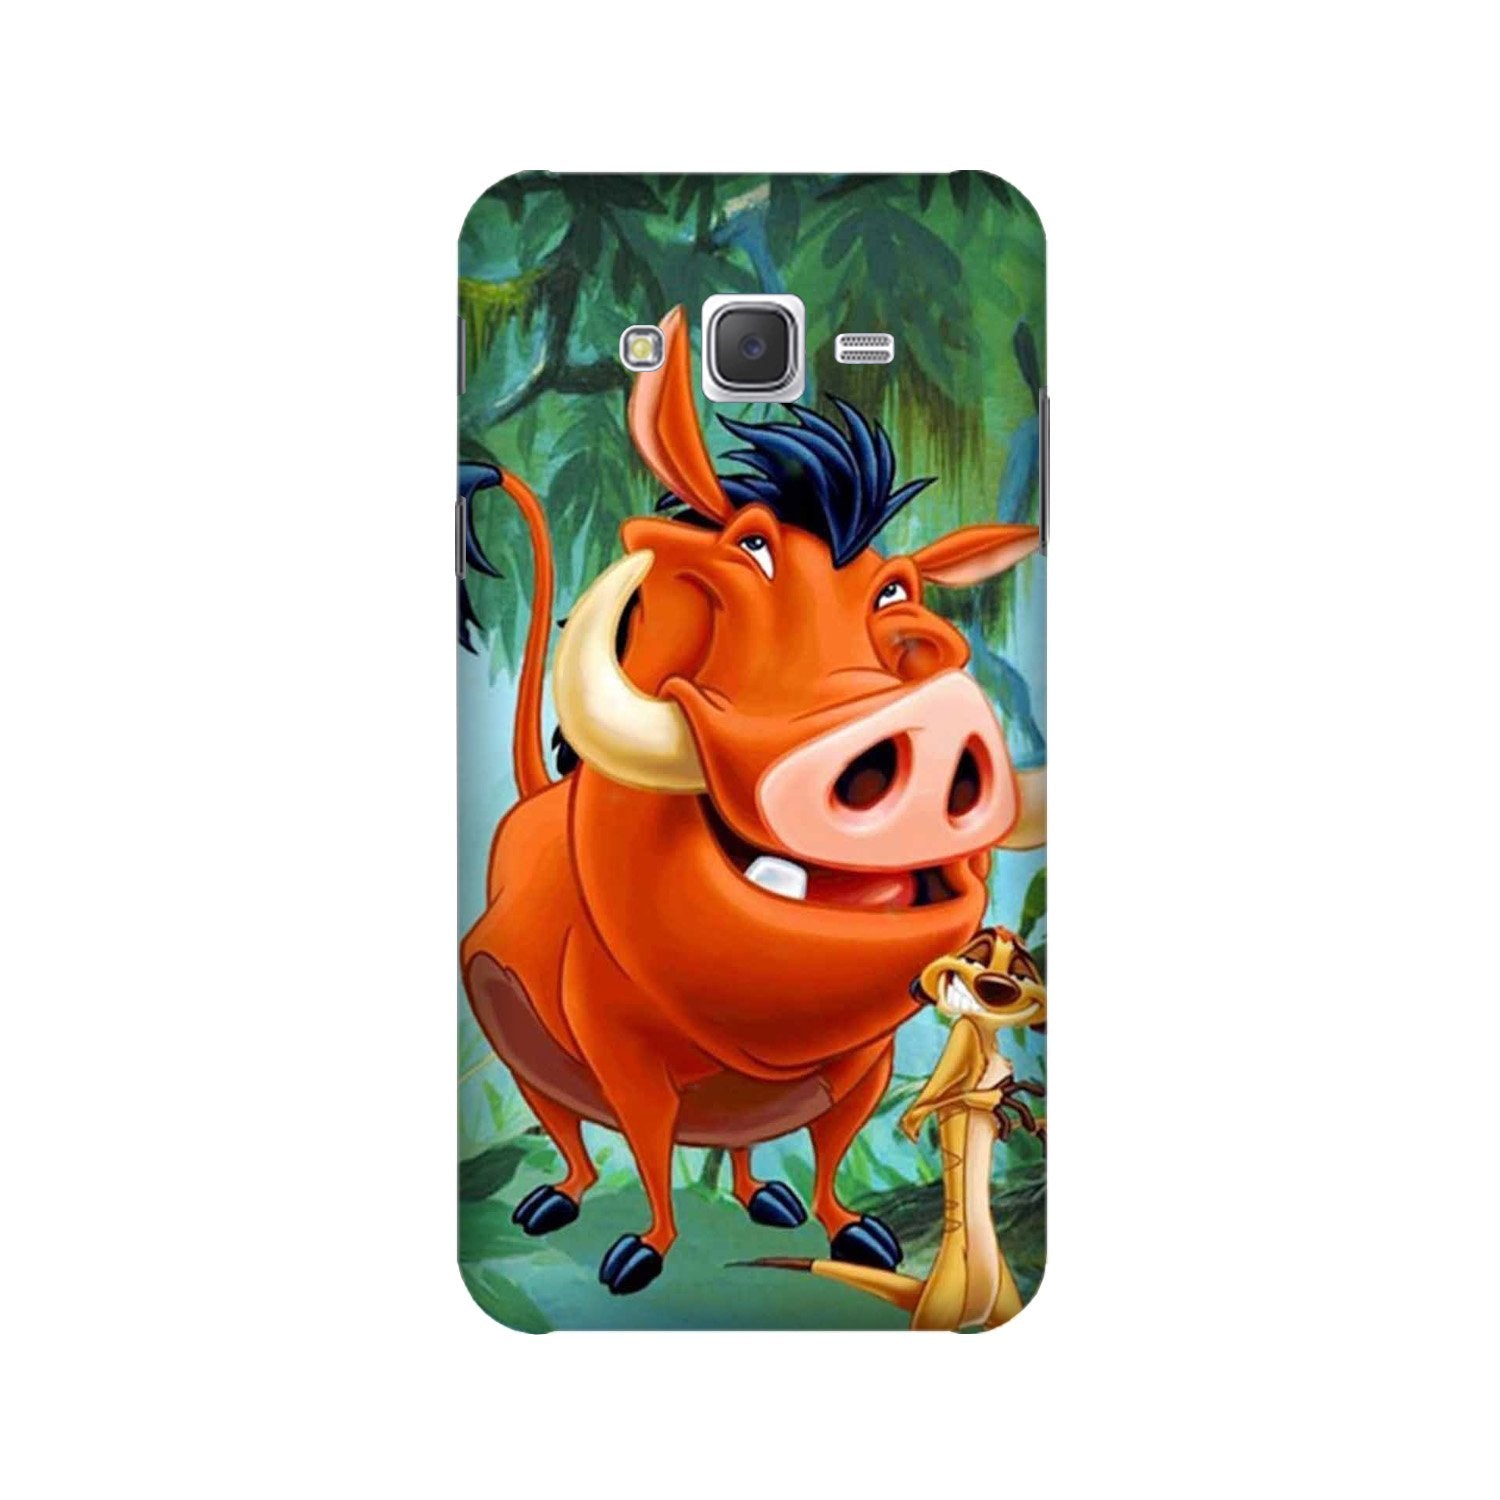 Timon and Pumbaa Mobile Back Case for Galaxy J7 (2016) (Design - 305)